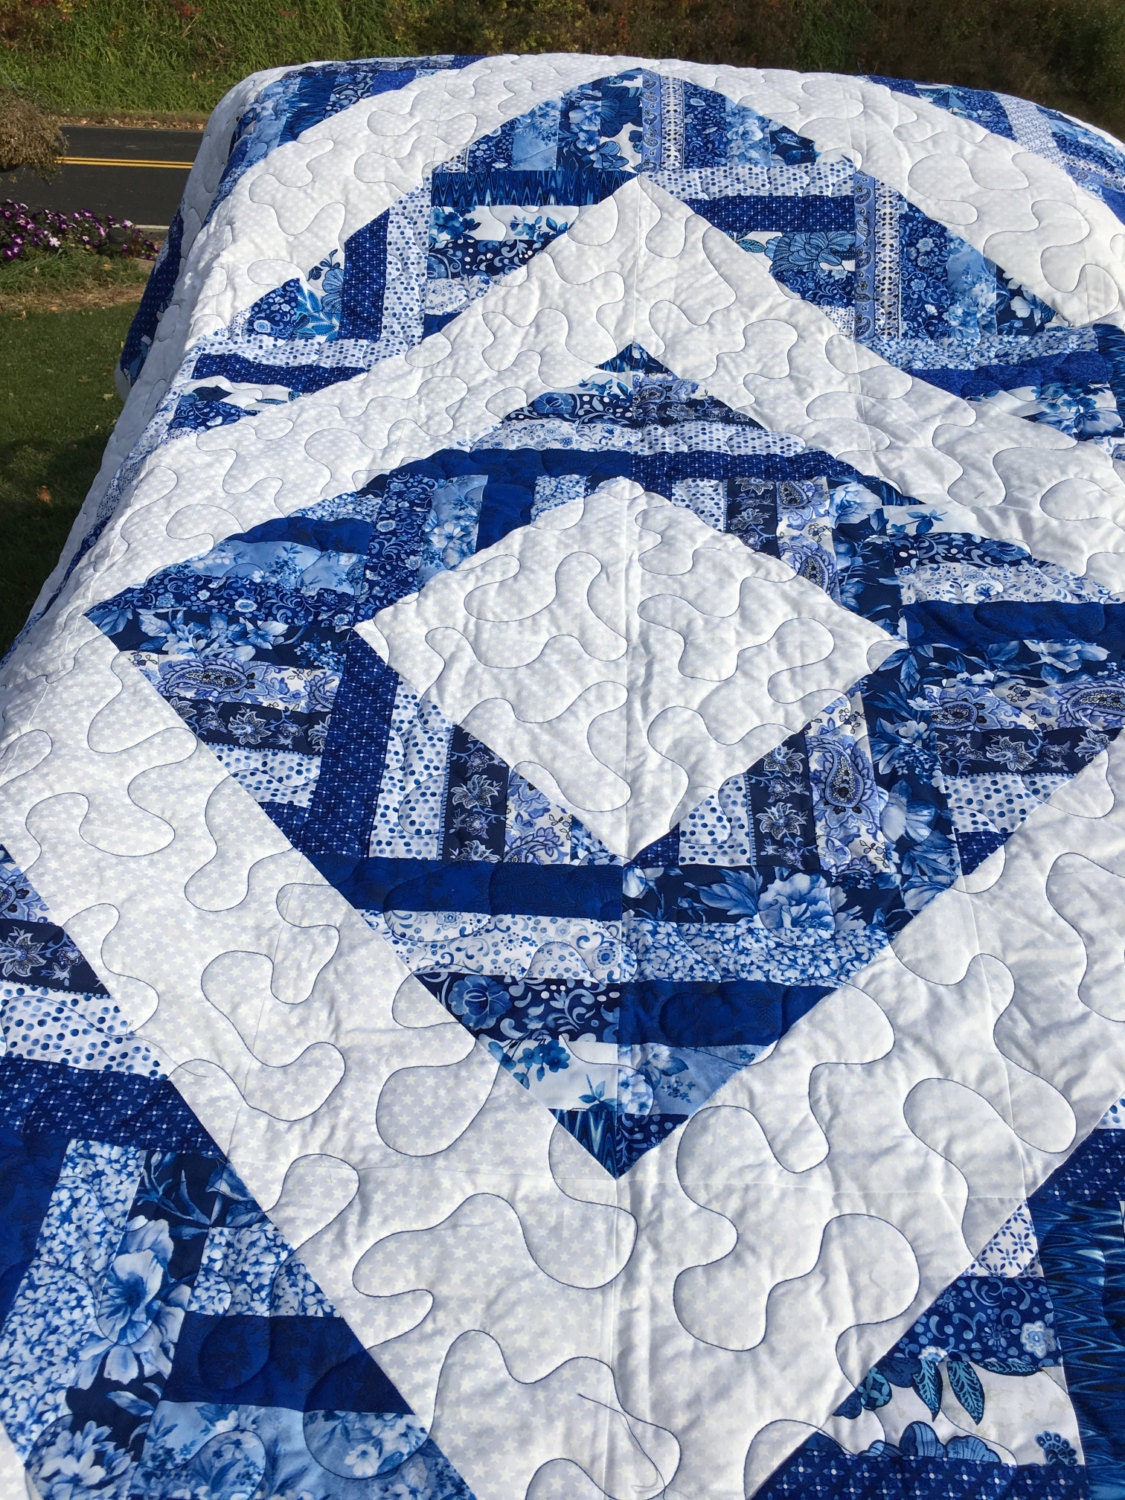 Blue and white handsewn queen size quilt